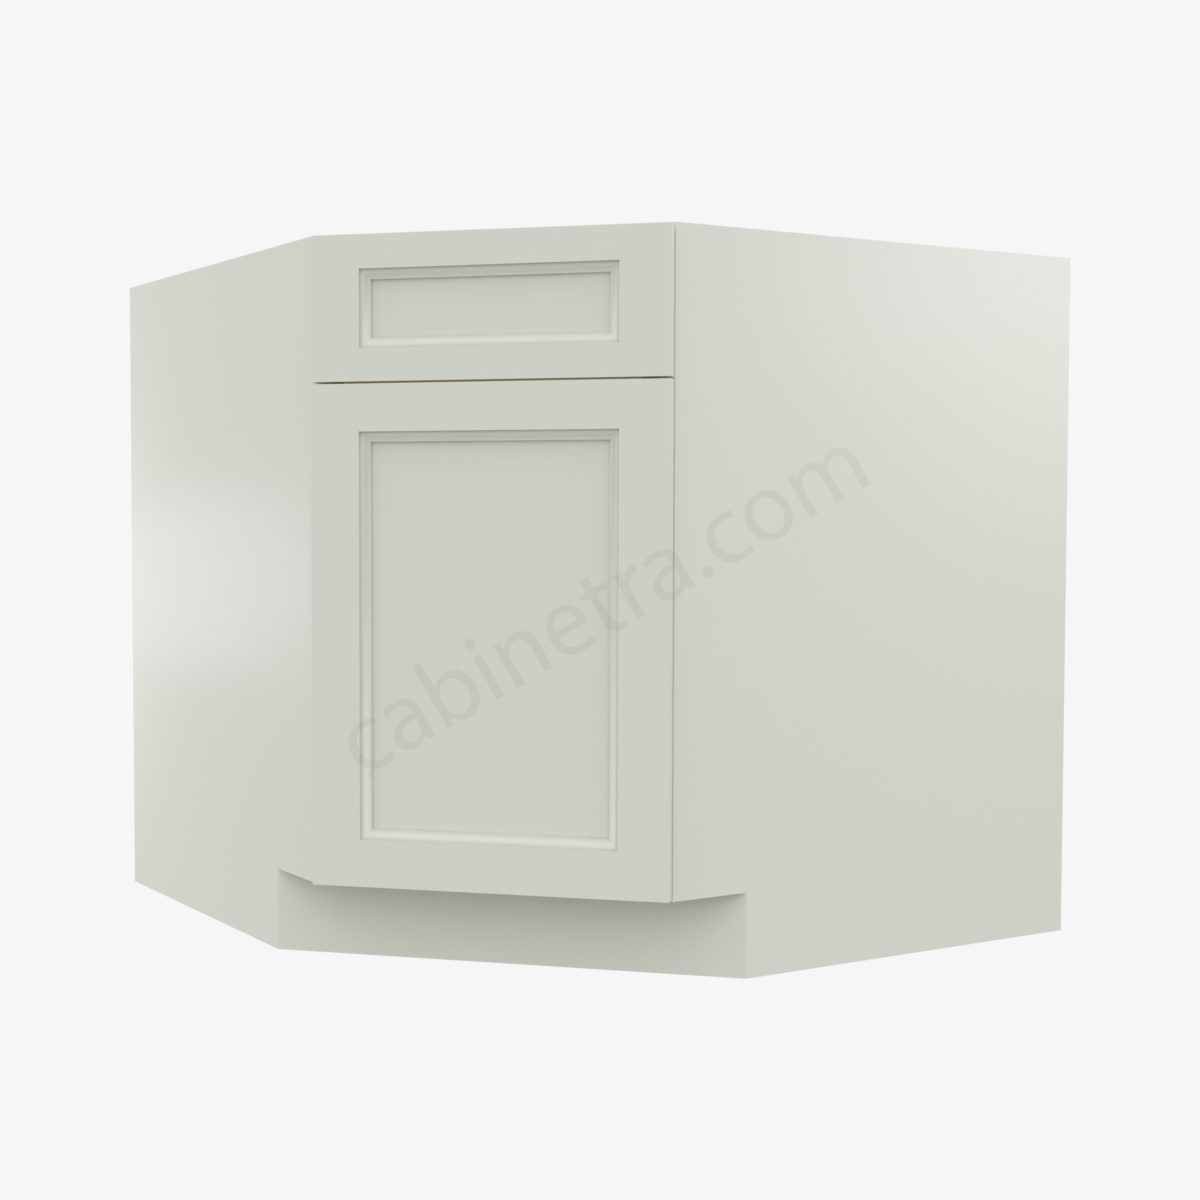 TQ BDCF36 4 Forevermark Townplace Crema Cabinetra scaled